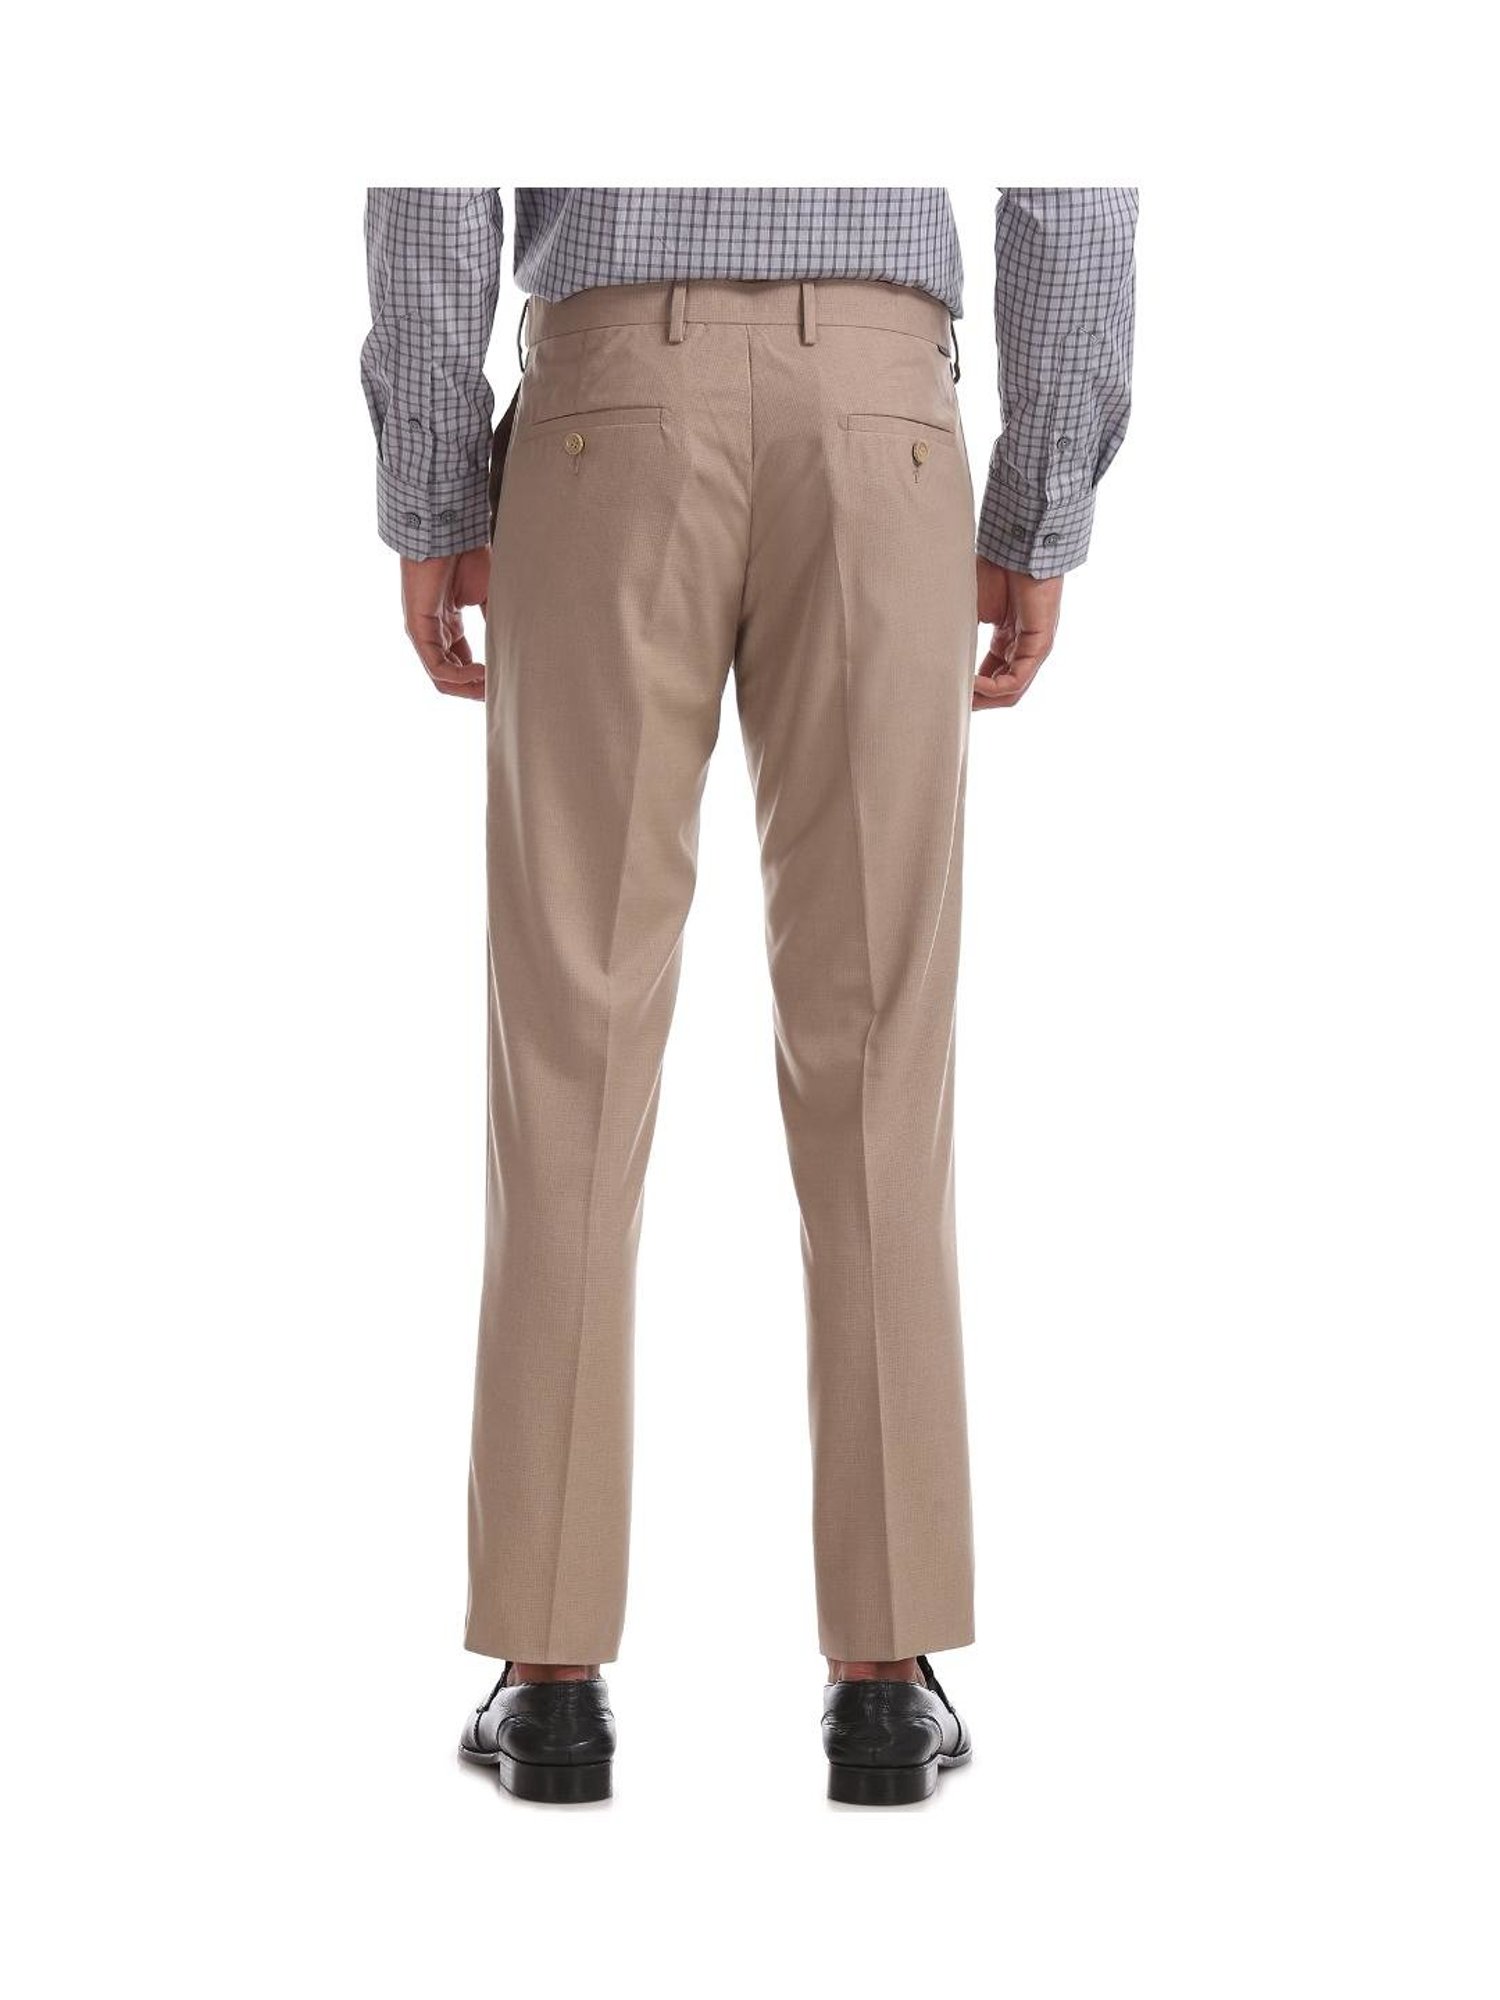 U.S. Polo Assn. Casual trousers for men - Buy now at Boozt.com